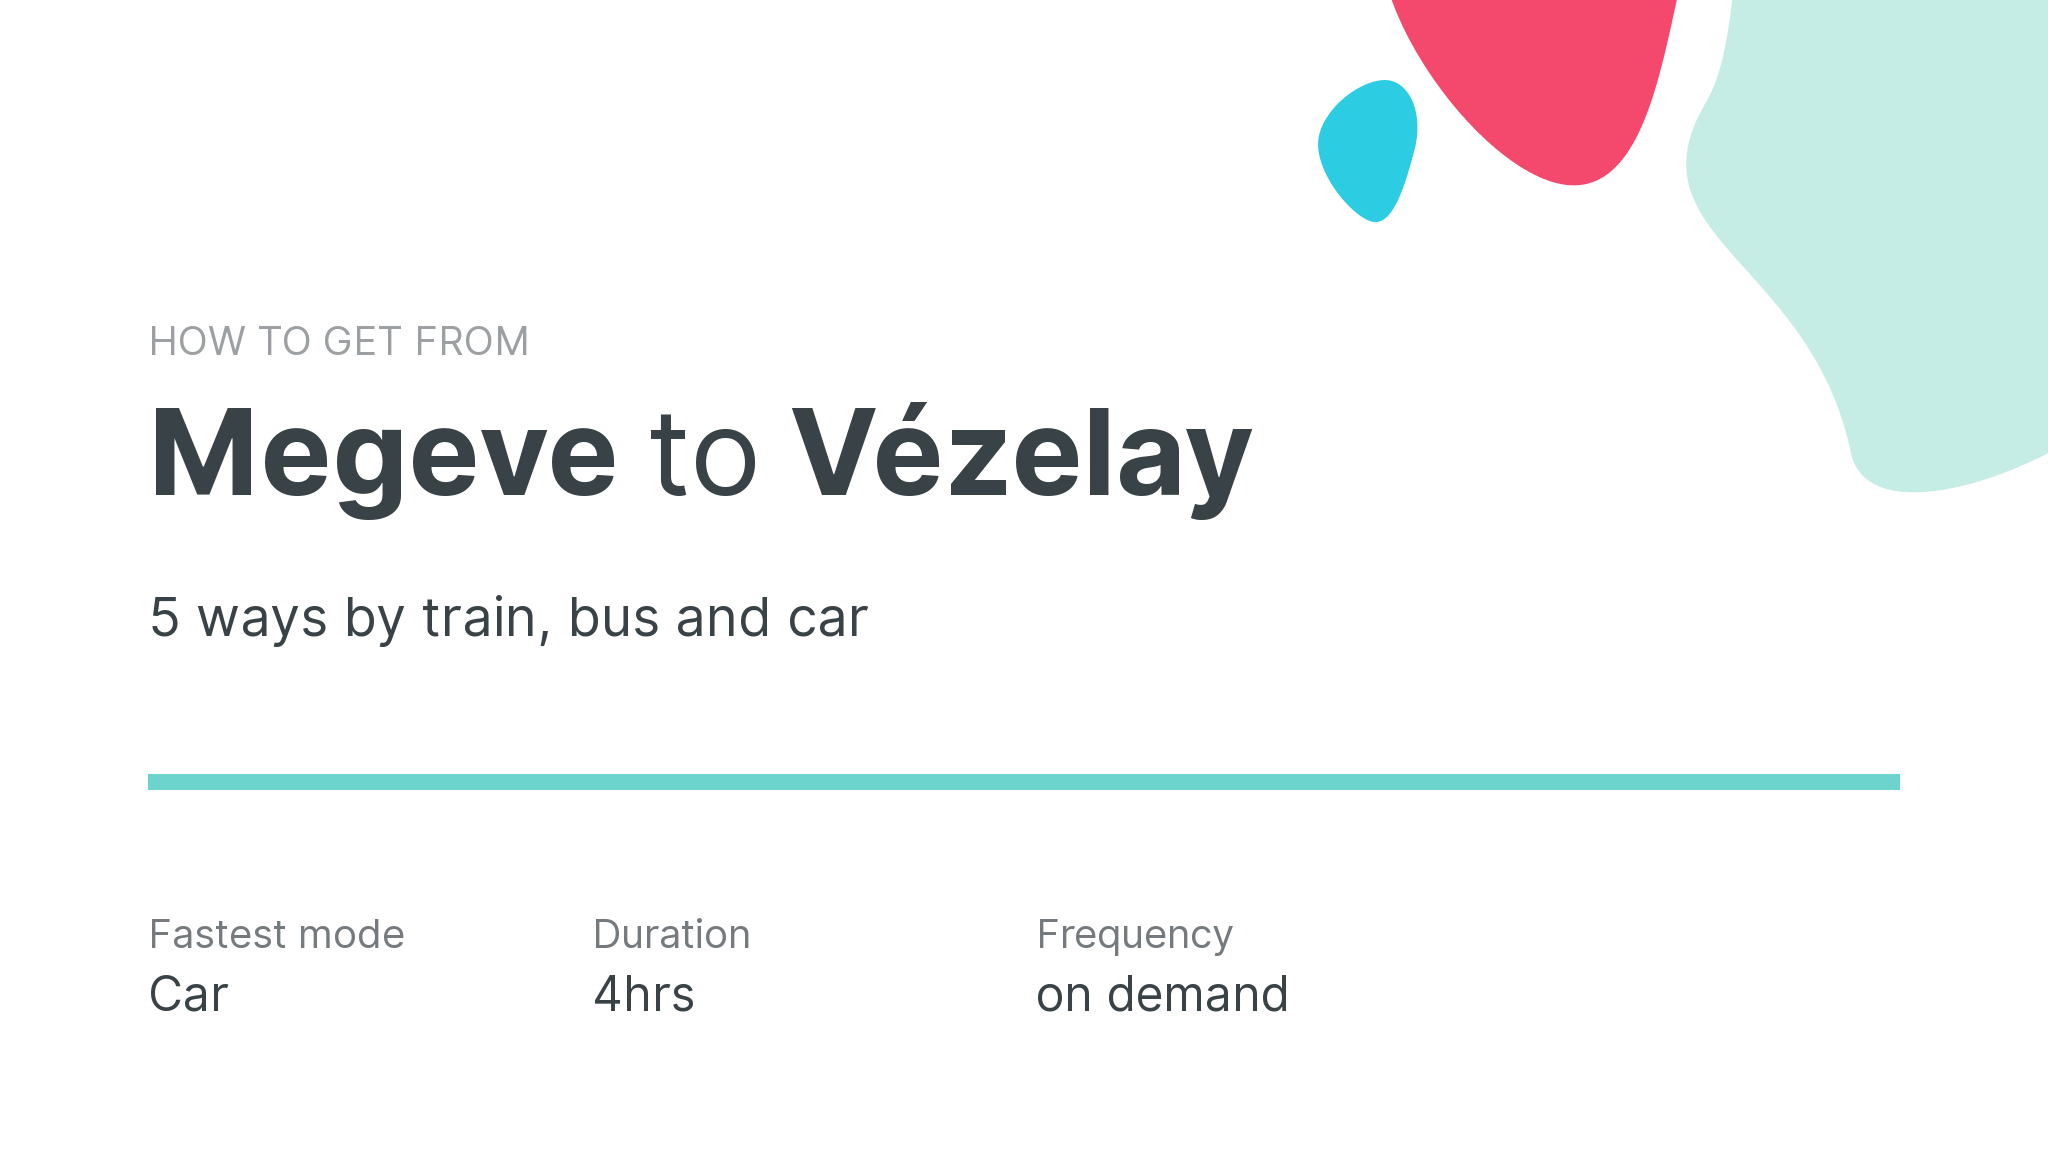 How do I get from Megeve to Vézelay